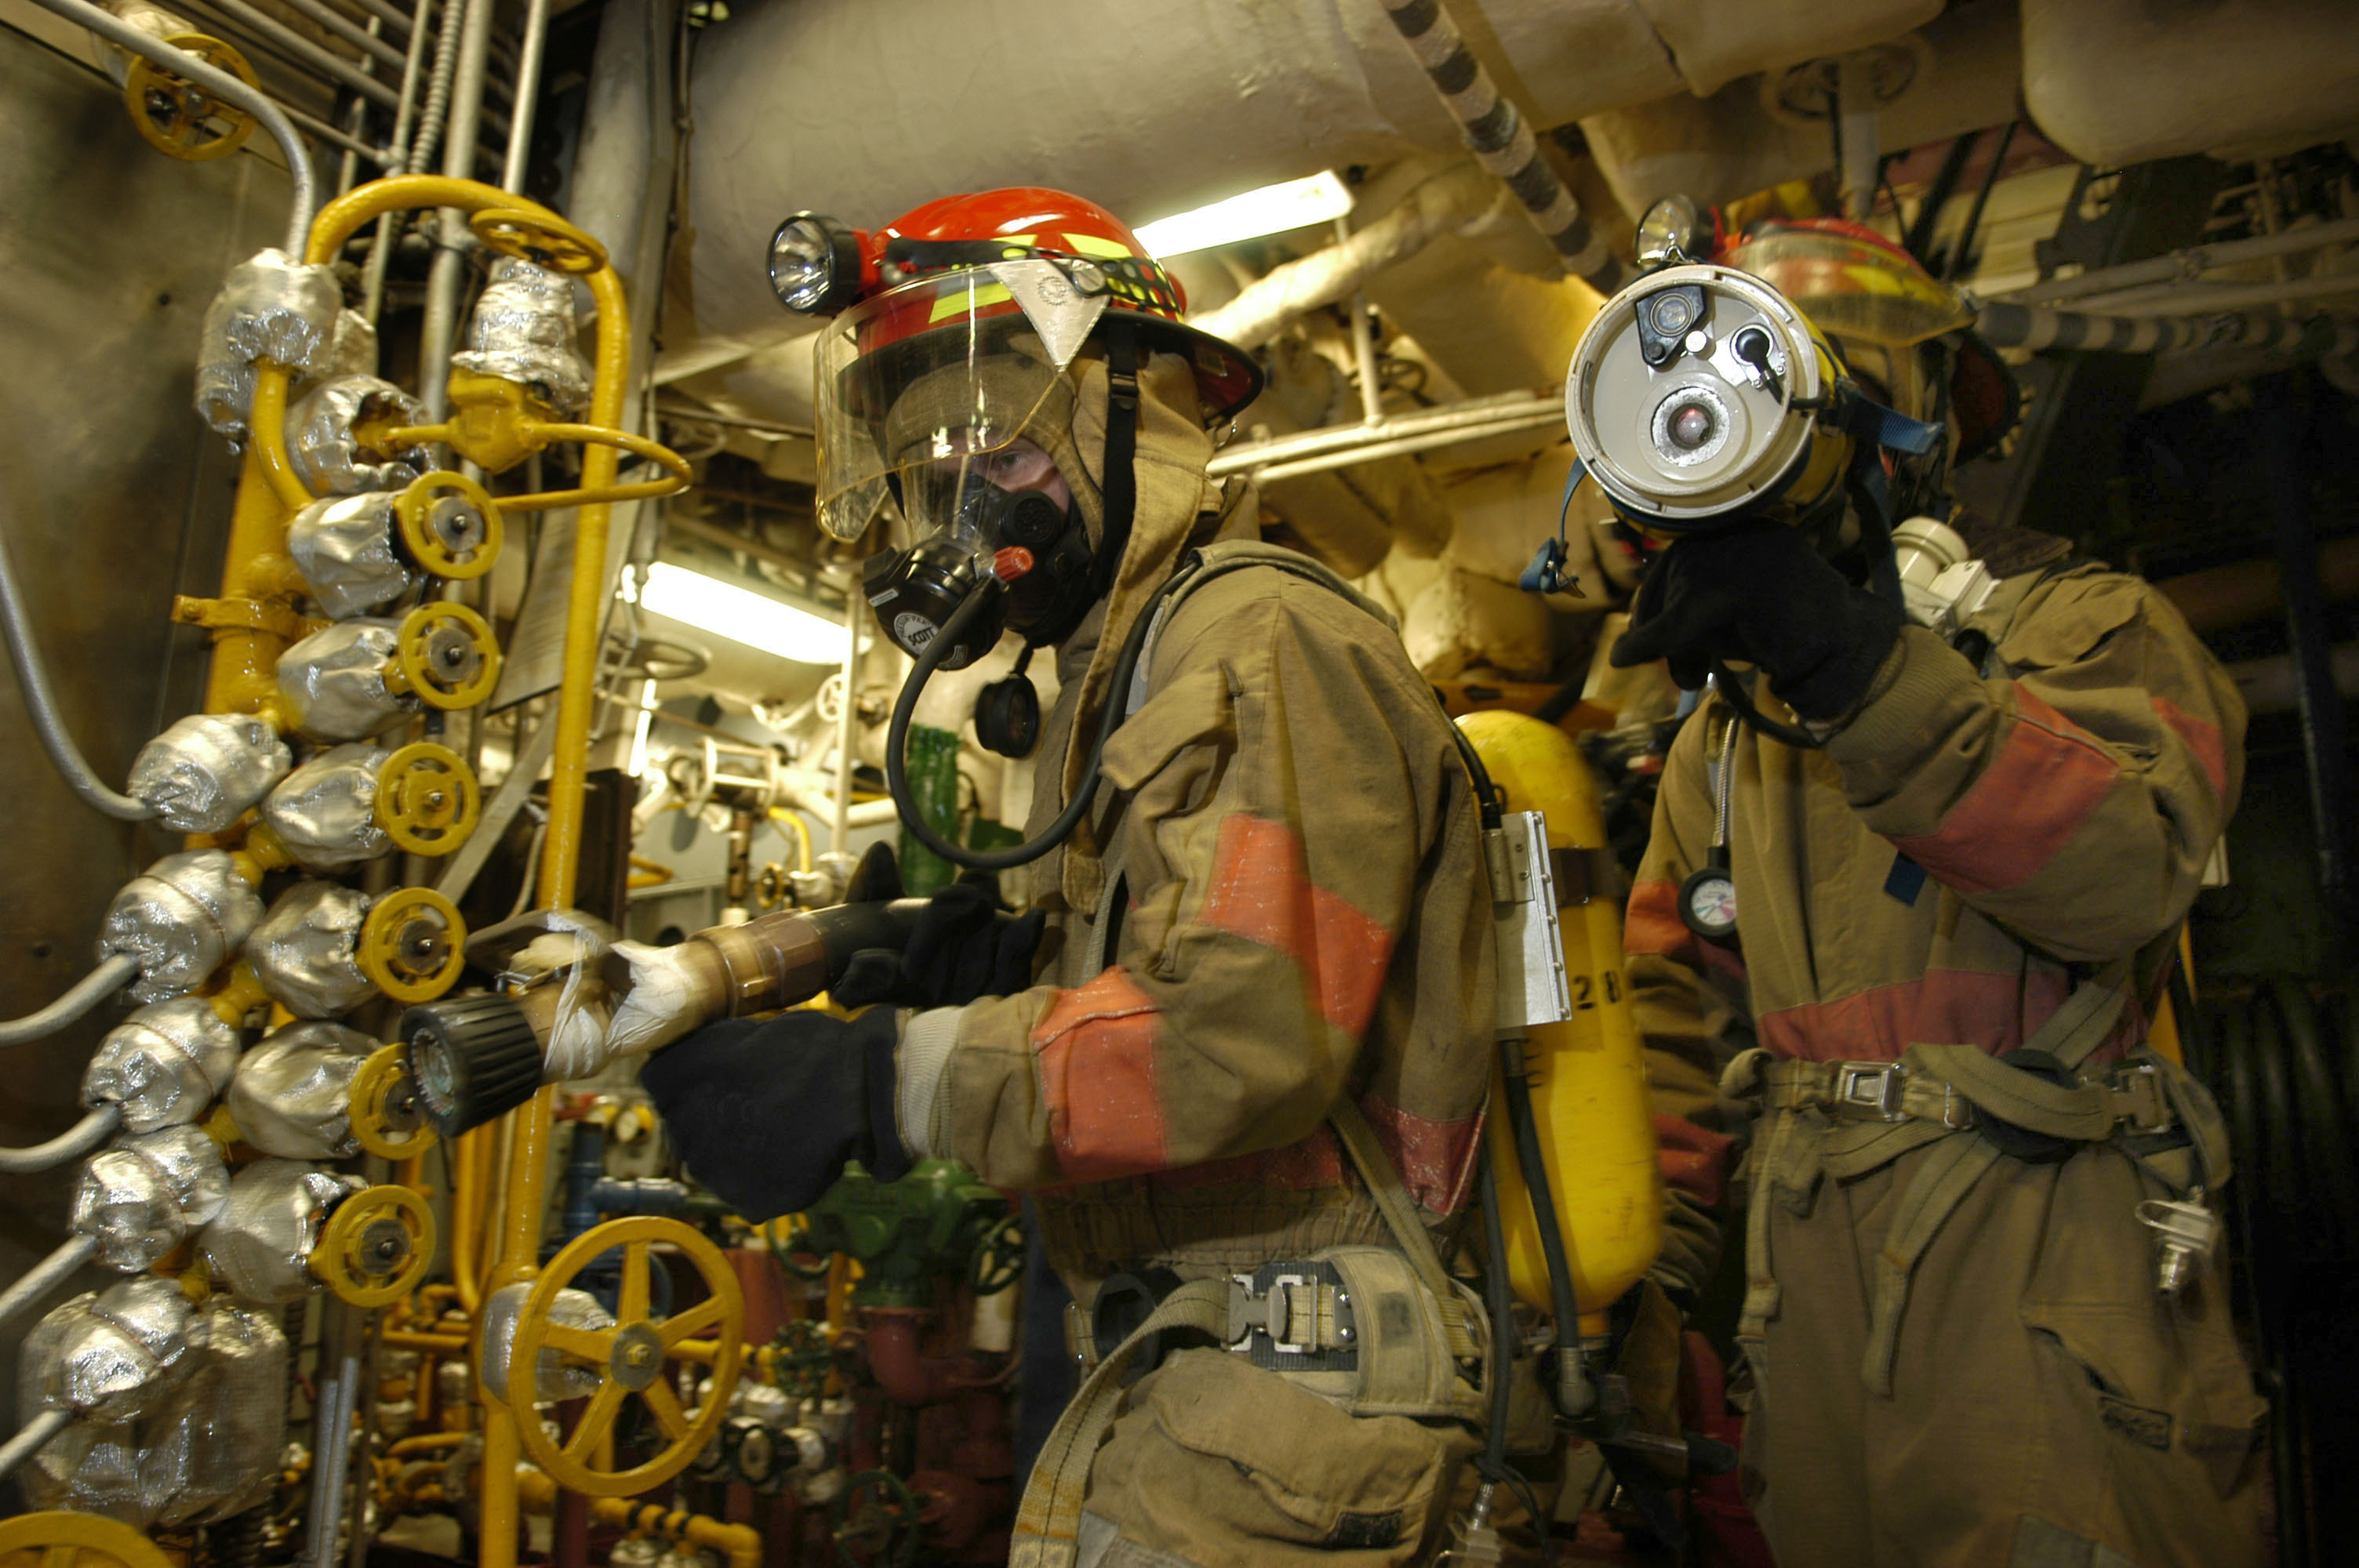 US Navy 050826-N-3136P-108 An on-scene leader uses a Naval Firefighter Thermal Imaging Device (NFTI) to search for fires during a main space fire drill aboard the conventionally-powered aircraft carrier USS Kitty Hawk (CV 63)